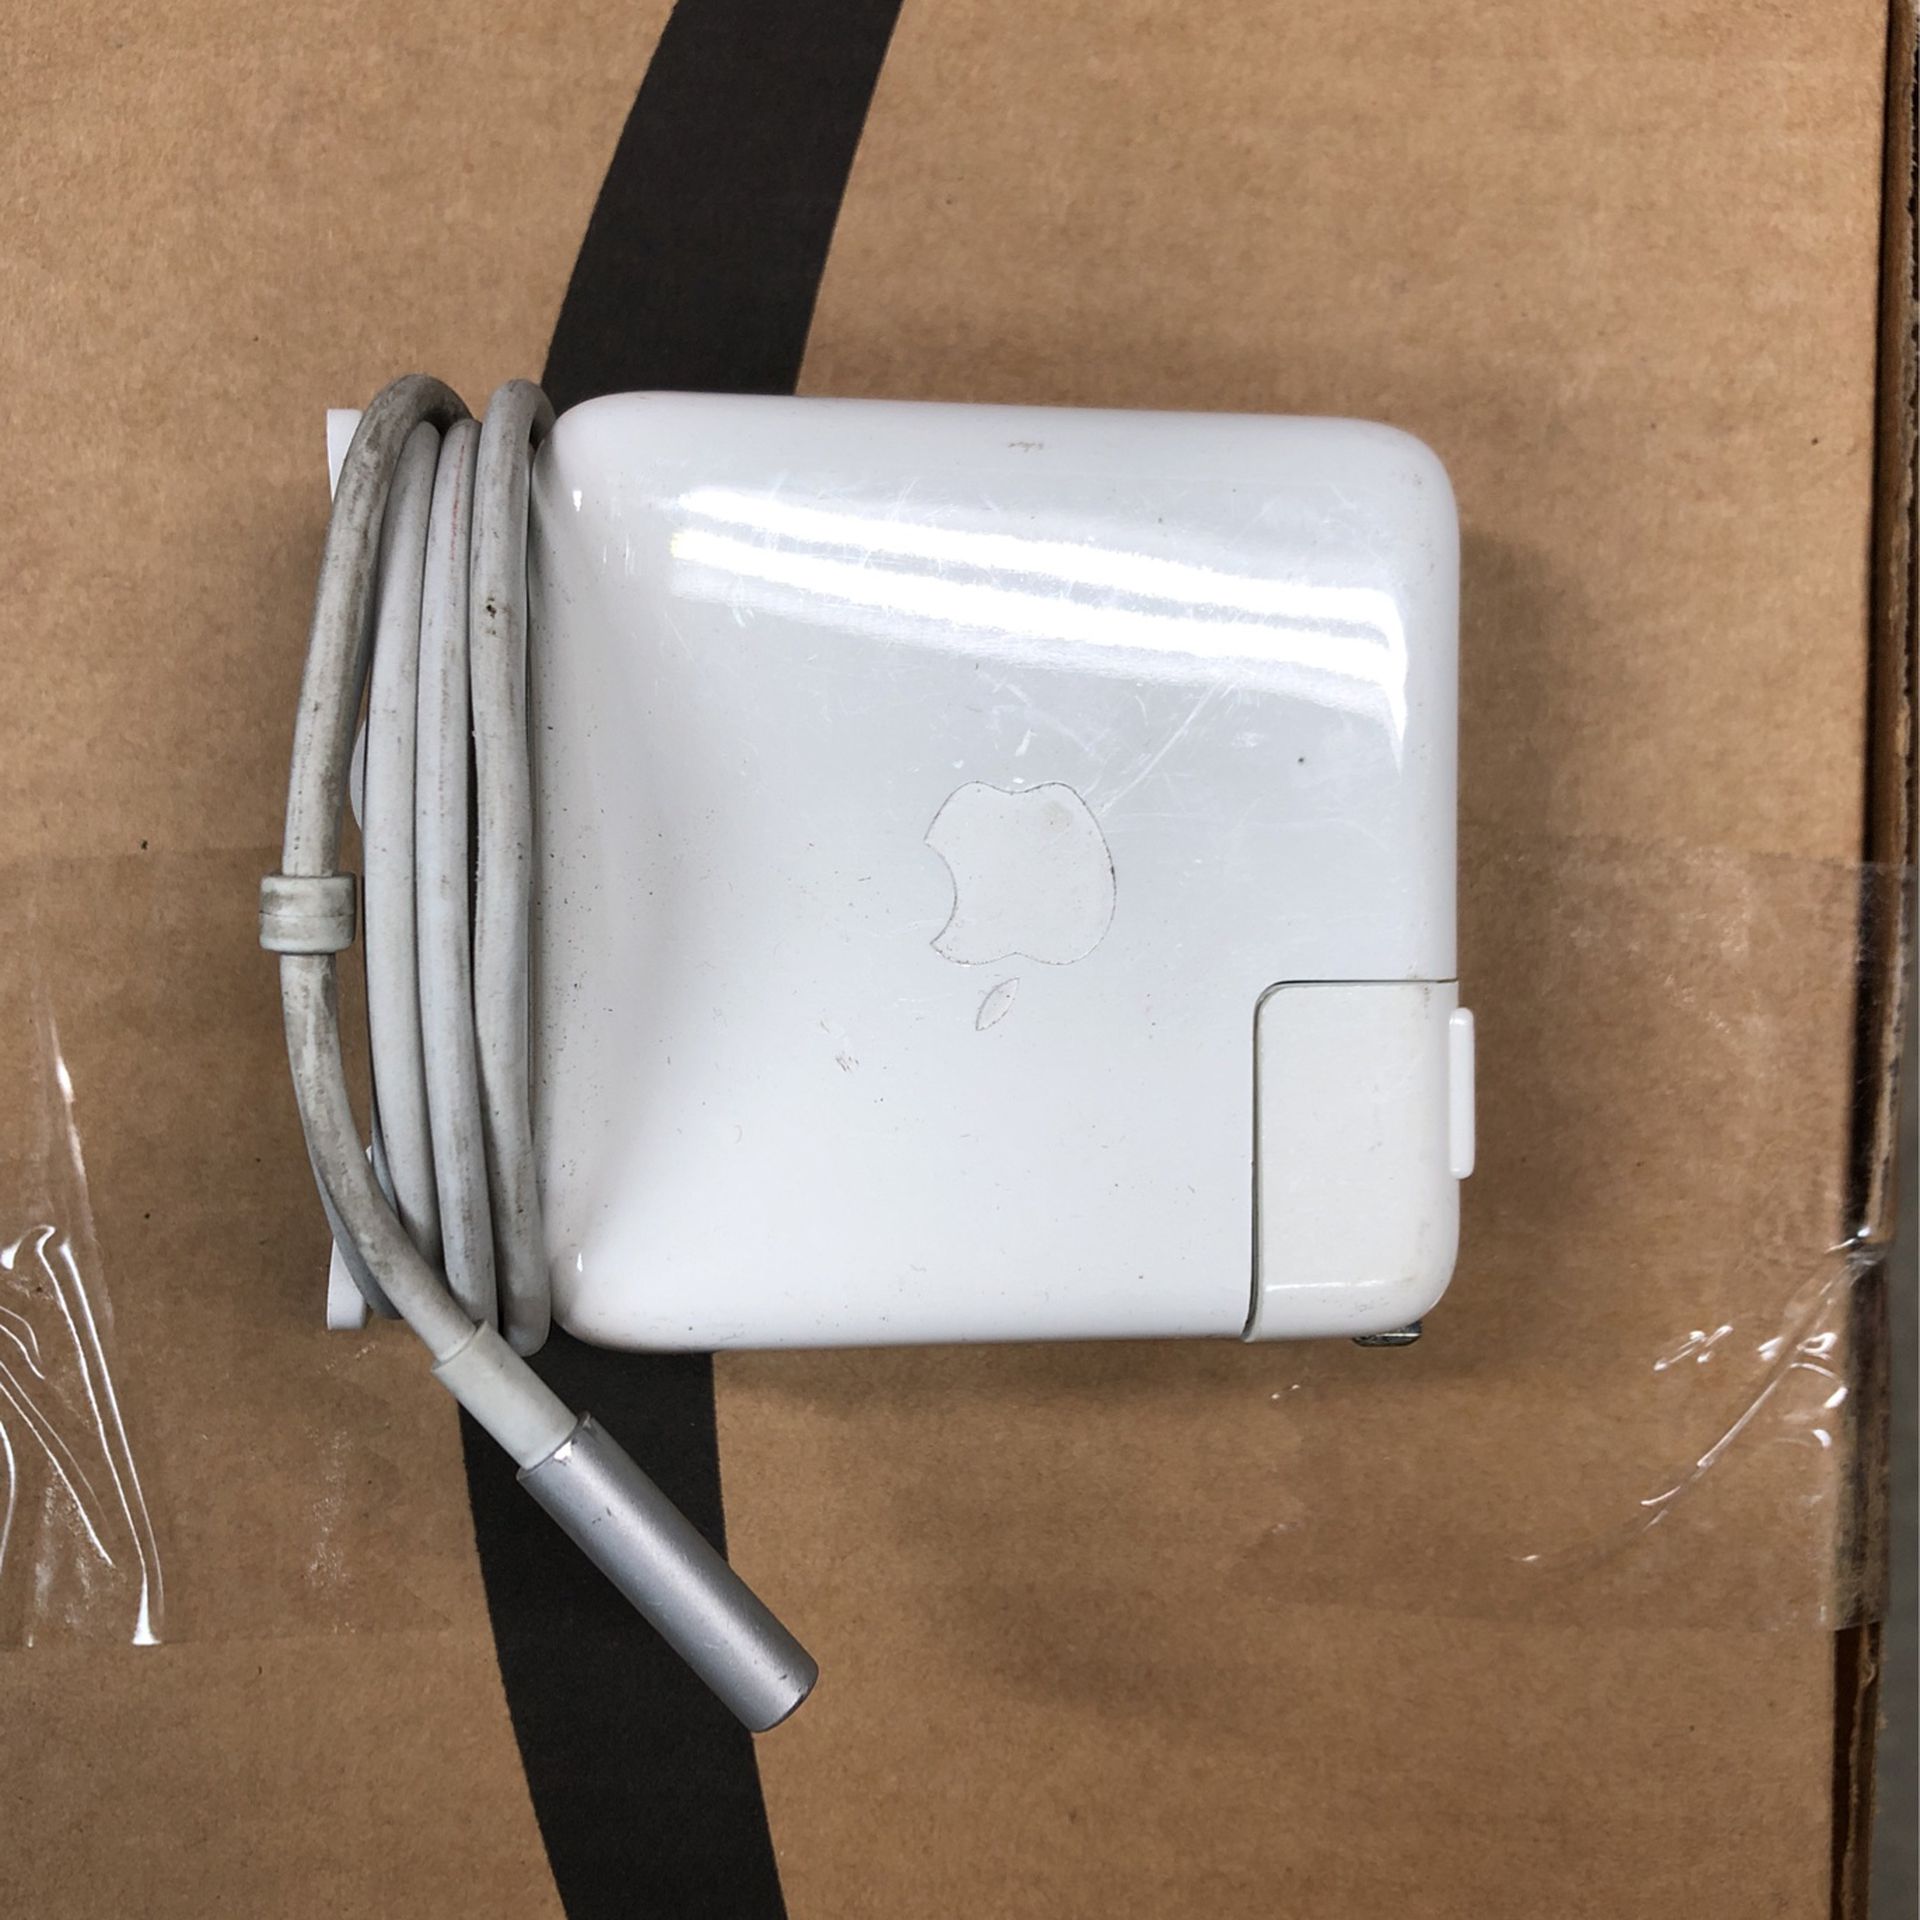 Apple MacBook Pro 13” 15” MagSafe Charger 60w